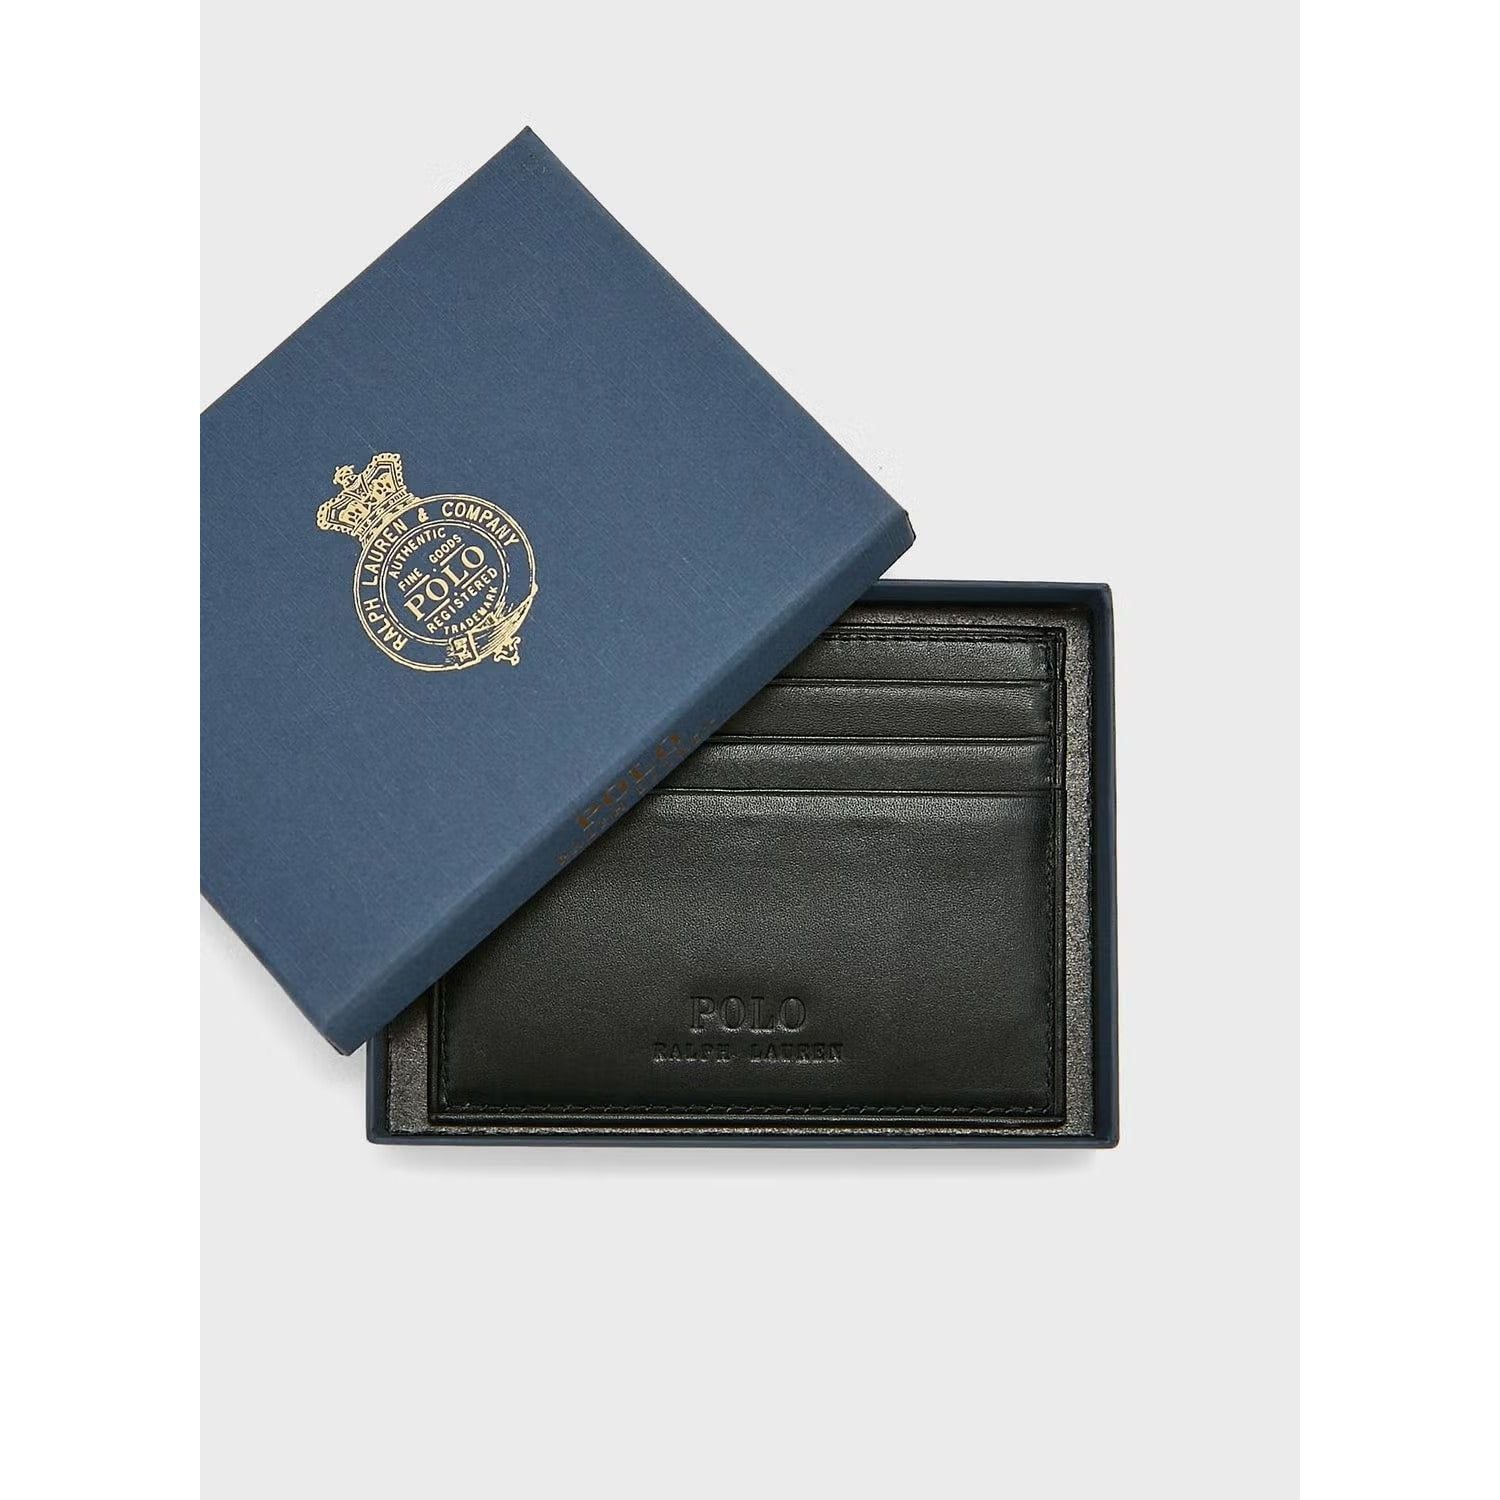 POLO RALPH LAUREN LEATHER CARD CASE - Yooto